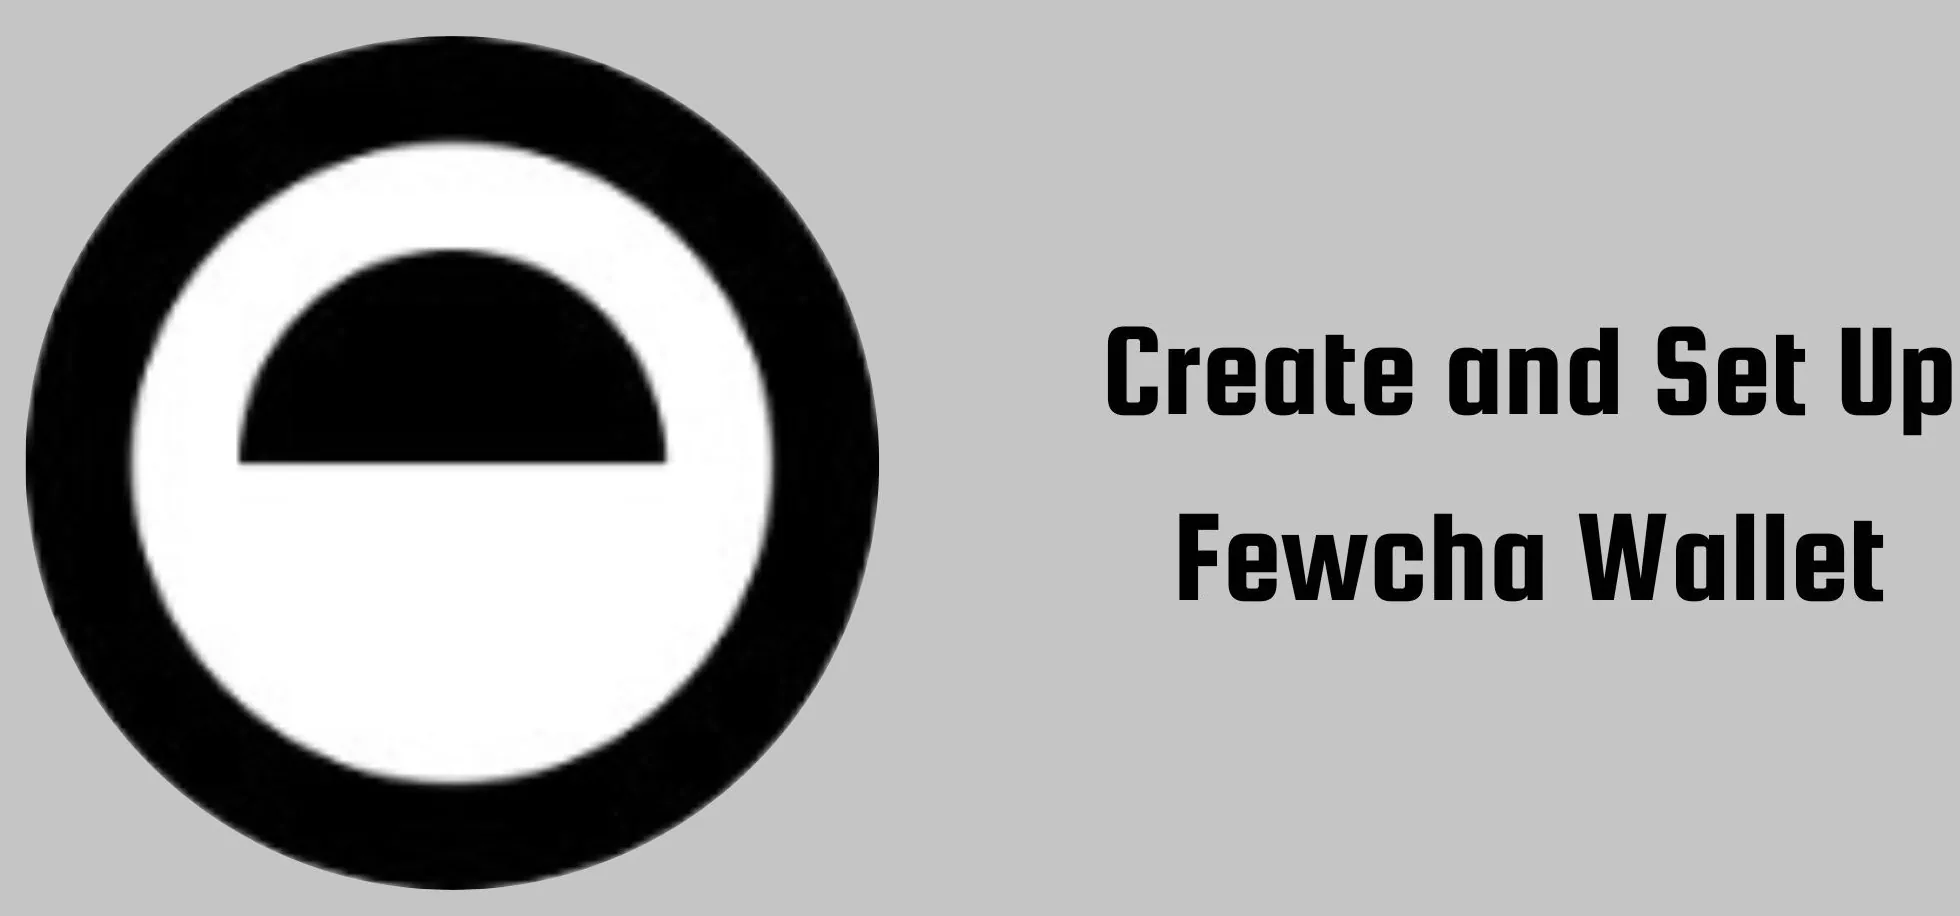 How To Create And Set Up Fewcha Wallet?